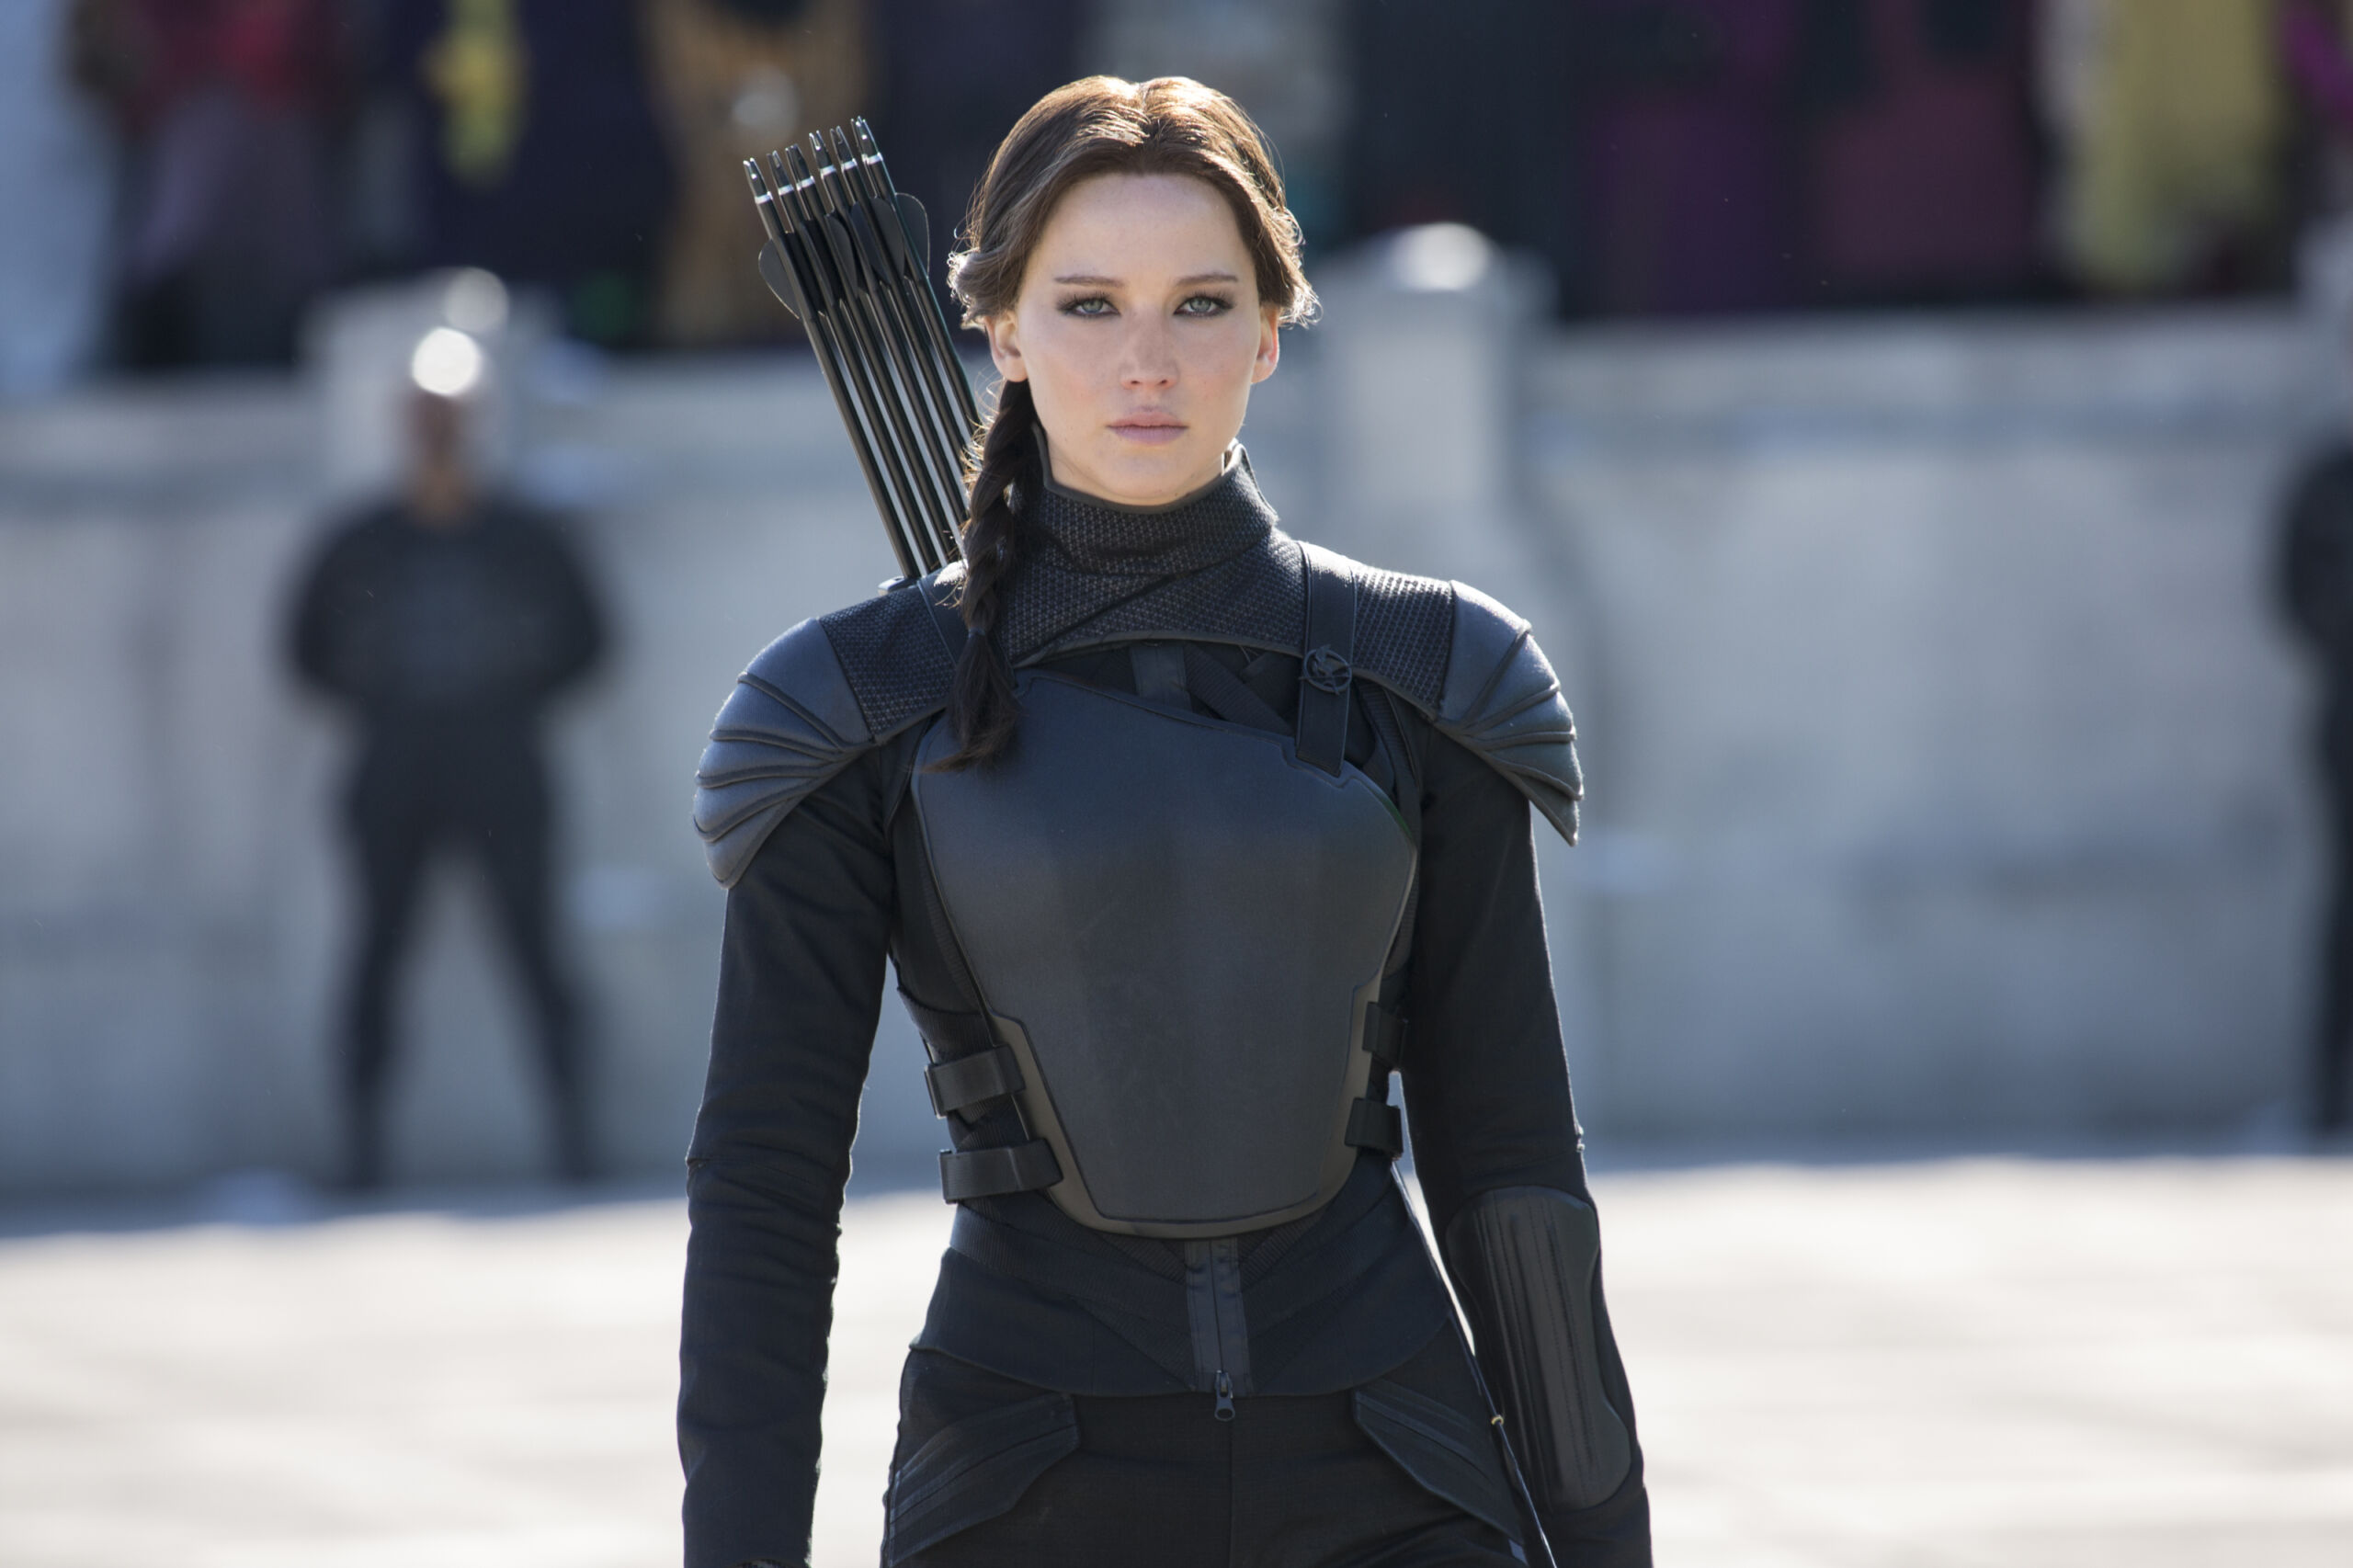 The Hunger Games: Catching Fire Streaming: Watch & Stream Online via Peacock